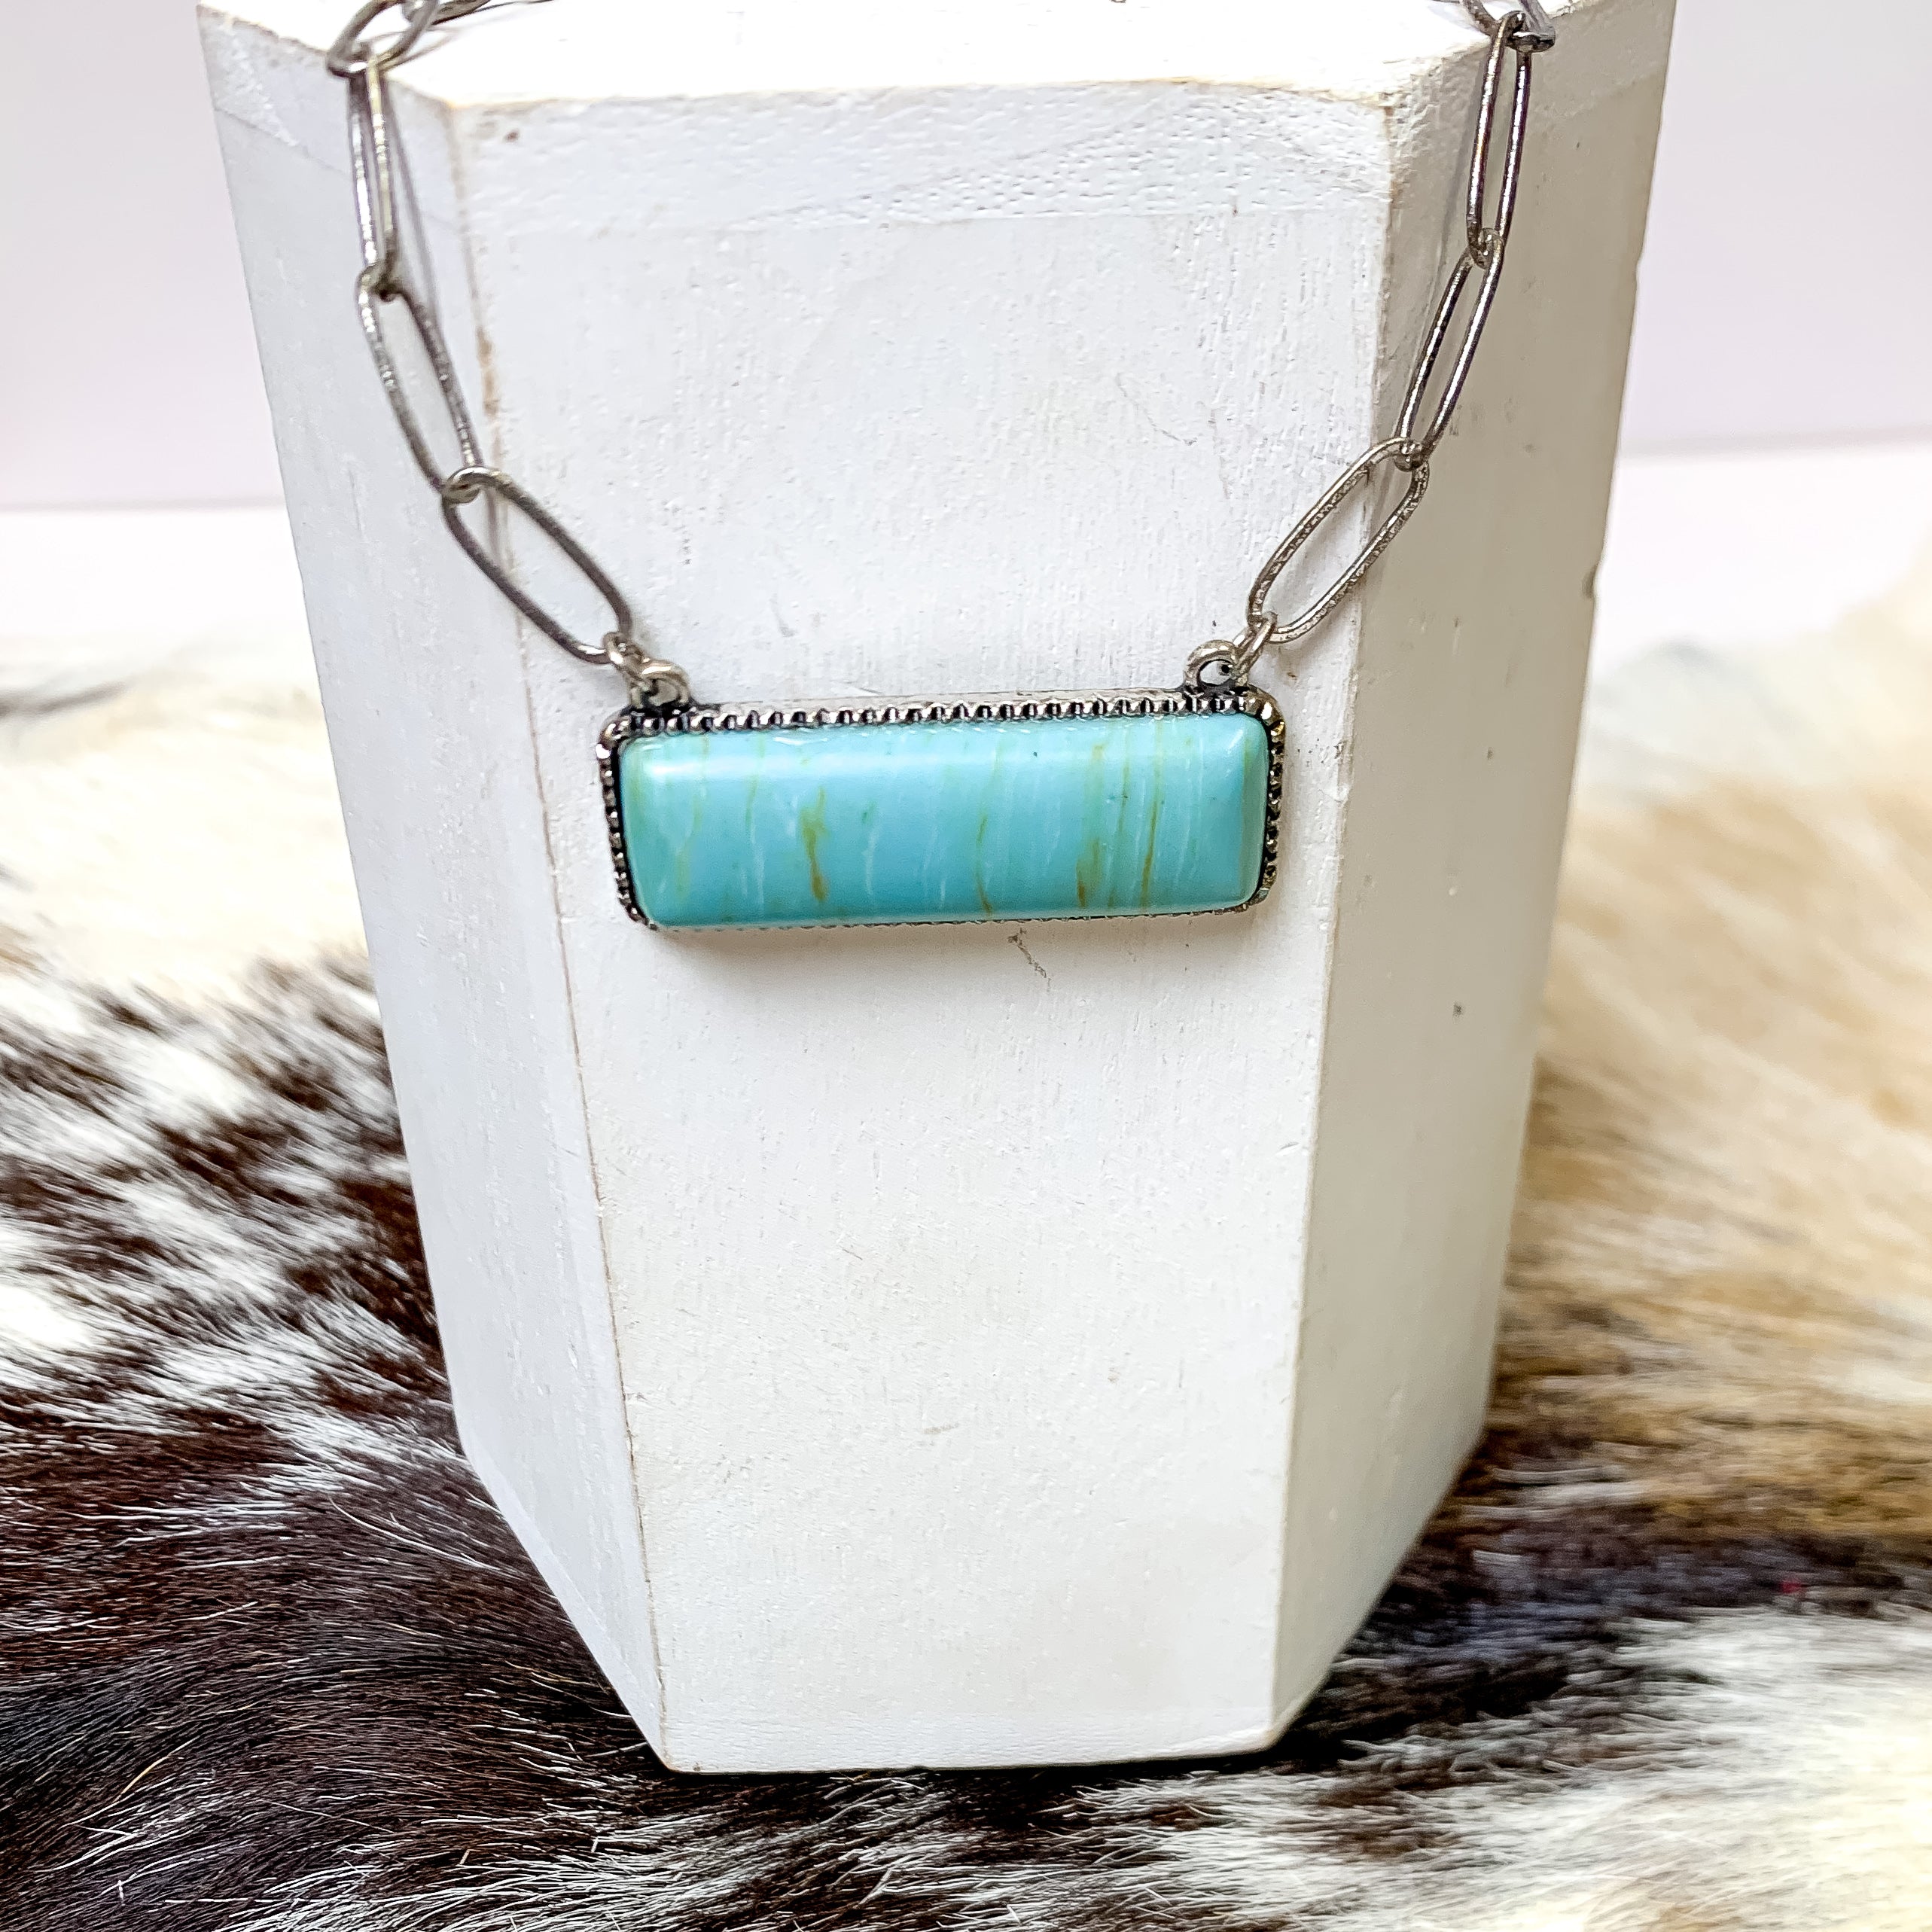 Let's Link Up Silver Tone Chain Necklace with Rectangle Agate Stone Pendant in Turquoise